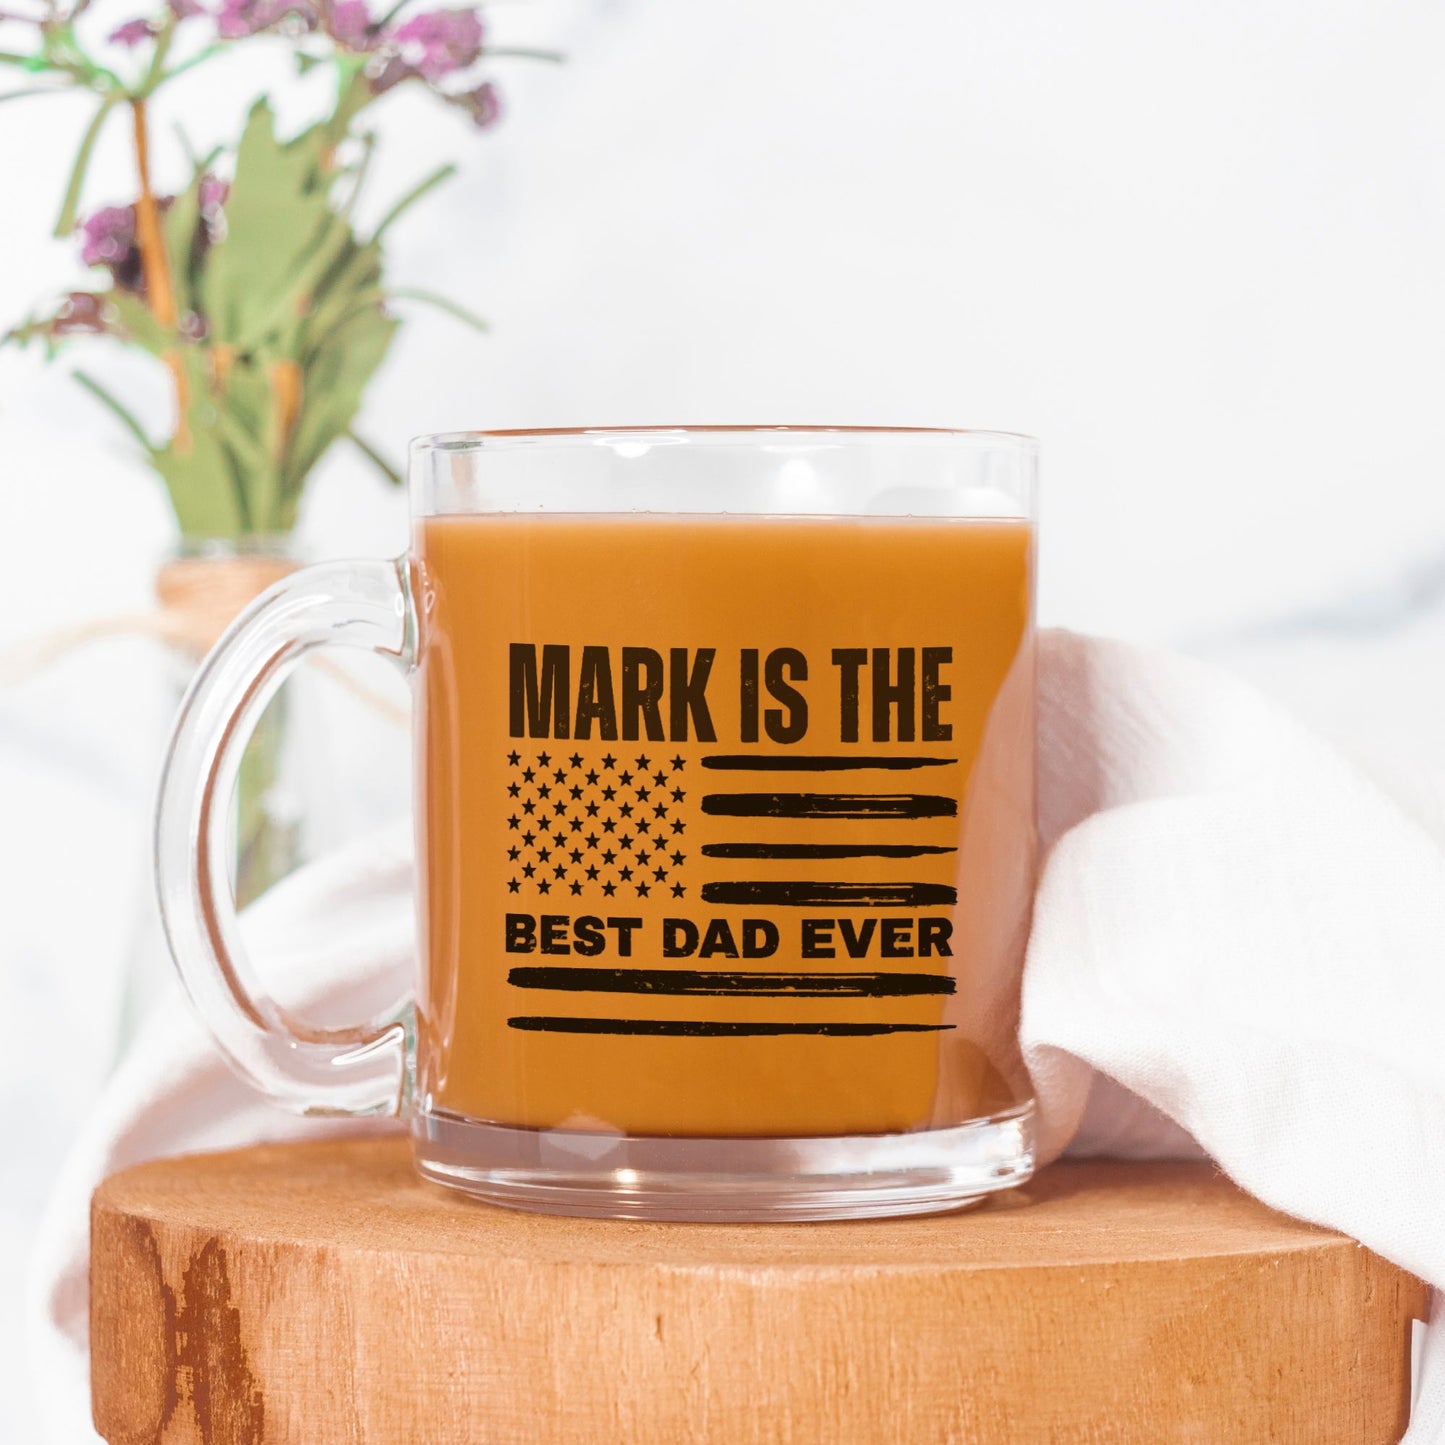 Is The Best Dad Ever Personalized Mug Glass